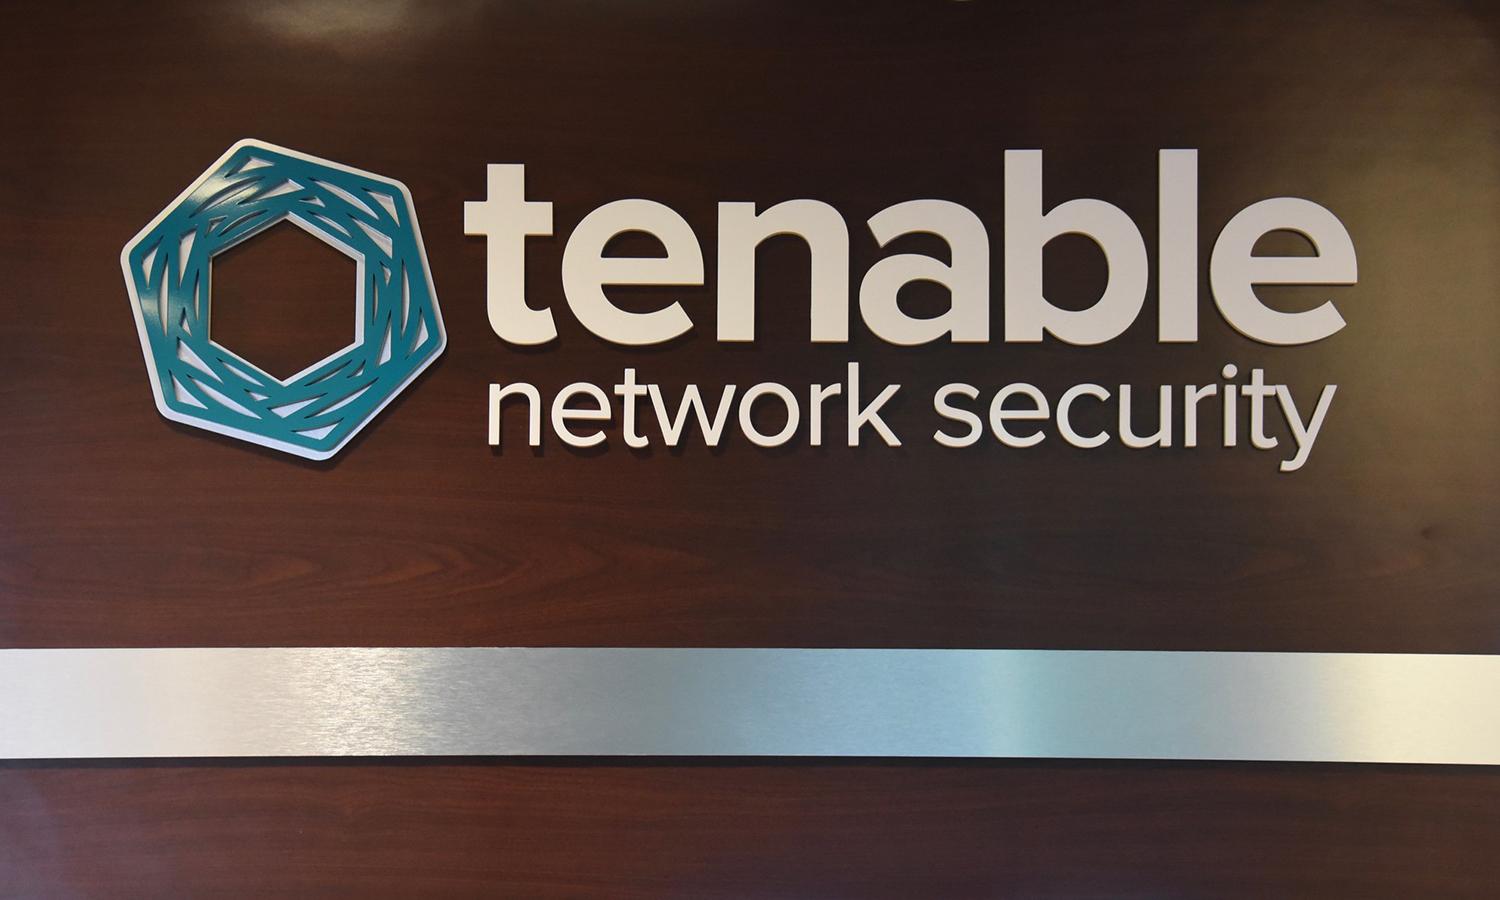 Maryland&#8217;s governor visits Tenable Network Security Inc in Columbia, Md. (&#8220;Tenable Network Security Inc&#8221; by MDGovpics is licensed under CC BY 2.0)